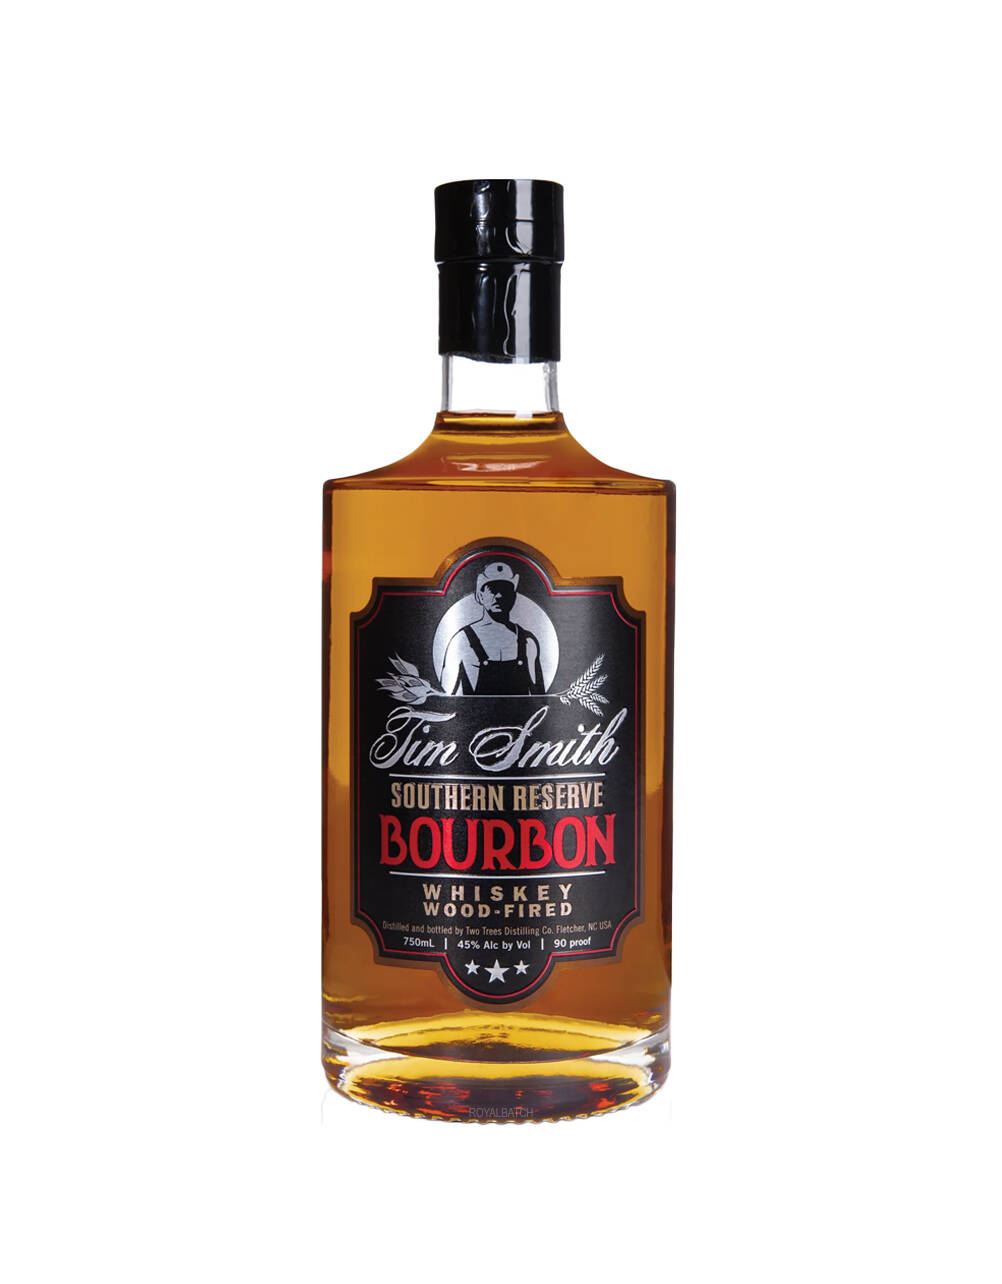 Tim Smith Southern Reserve Bourbon Wood Fired Whiskey